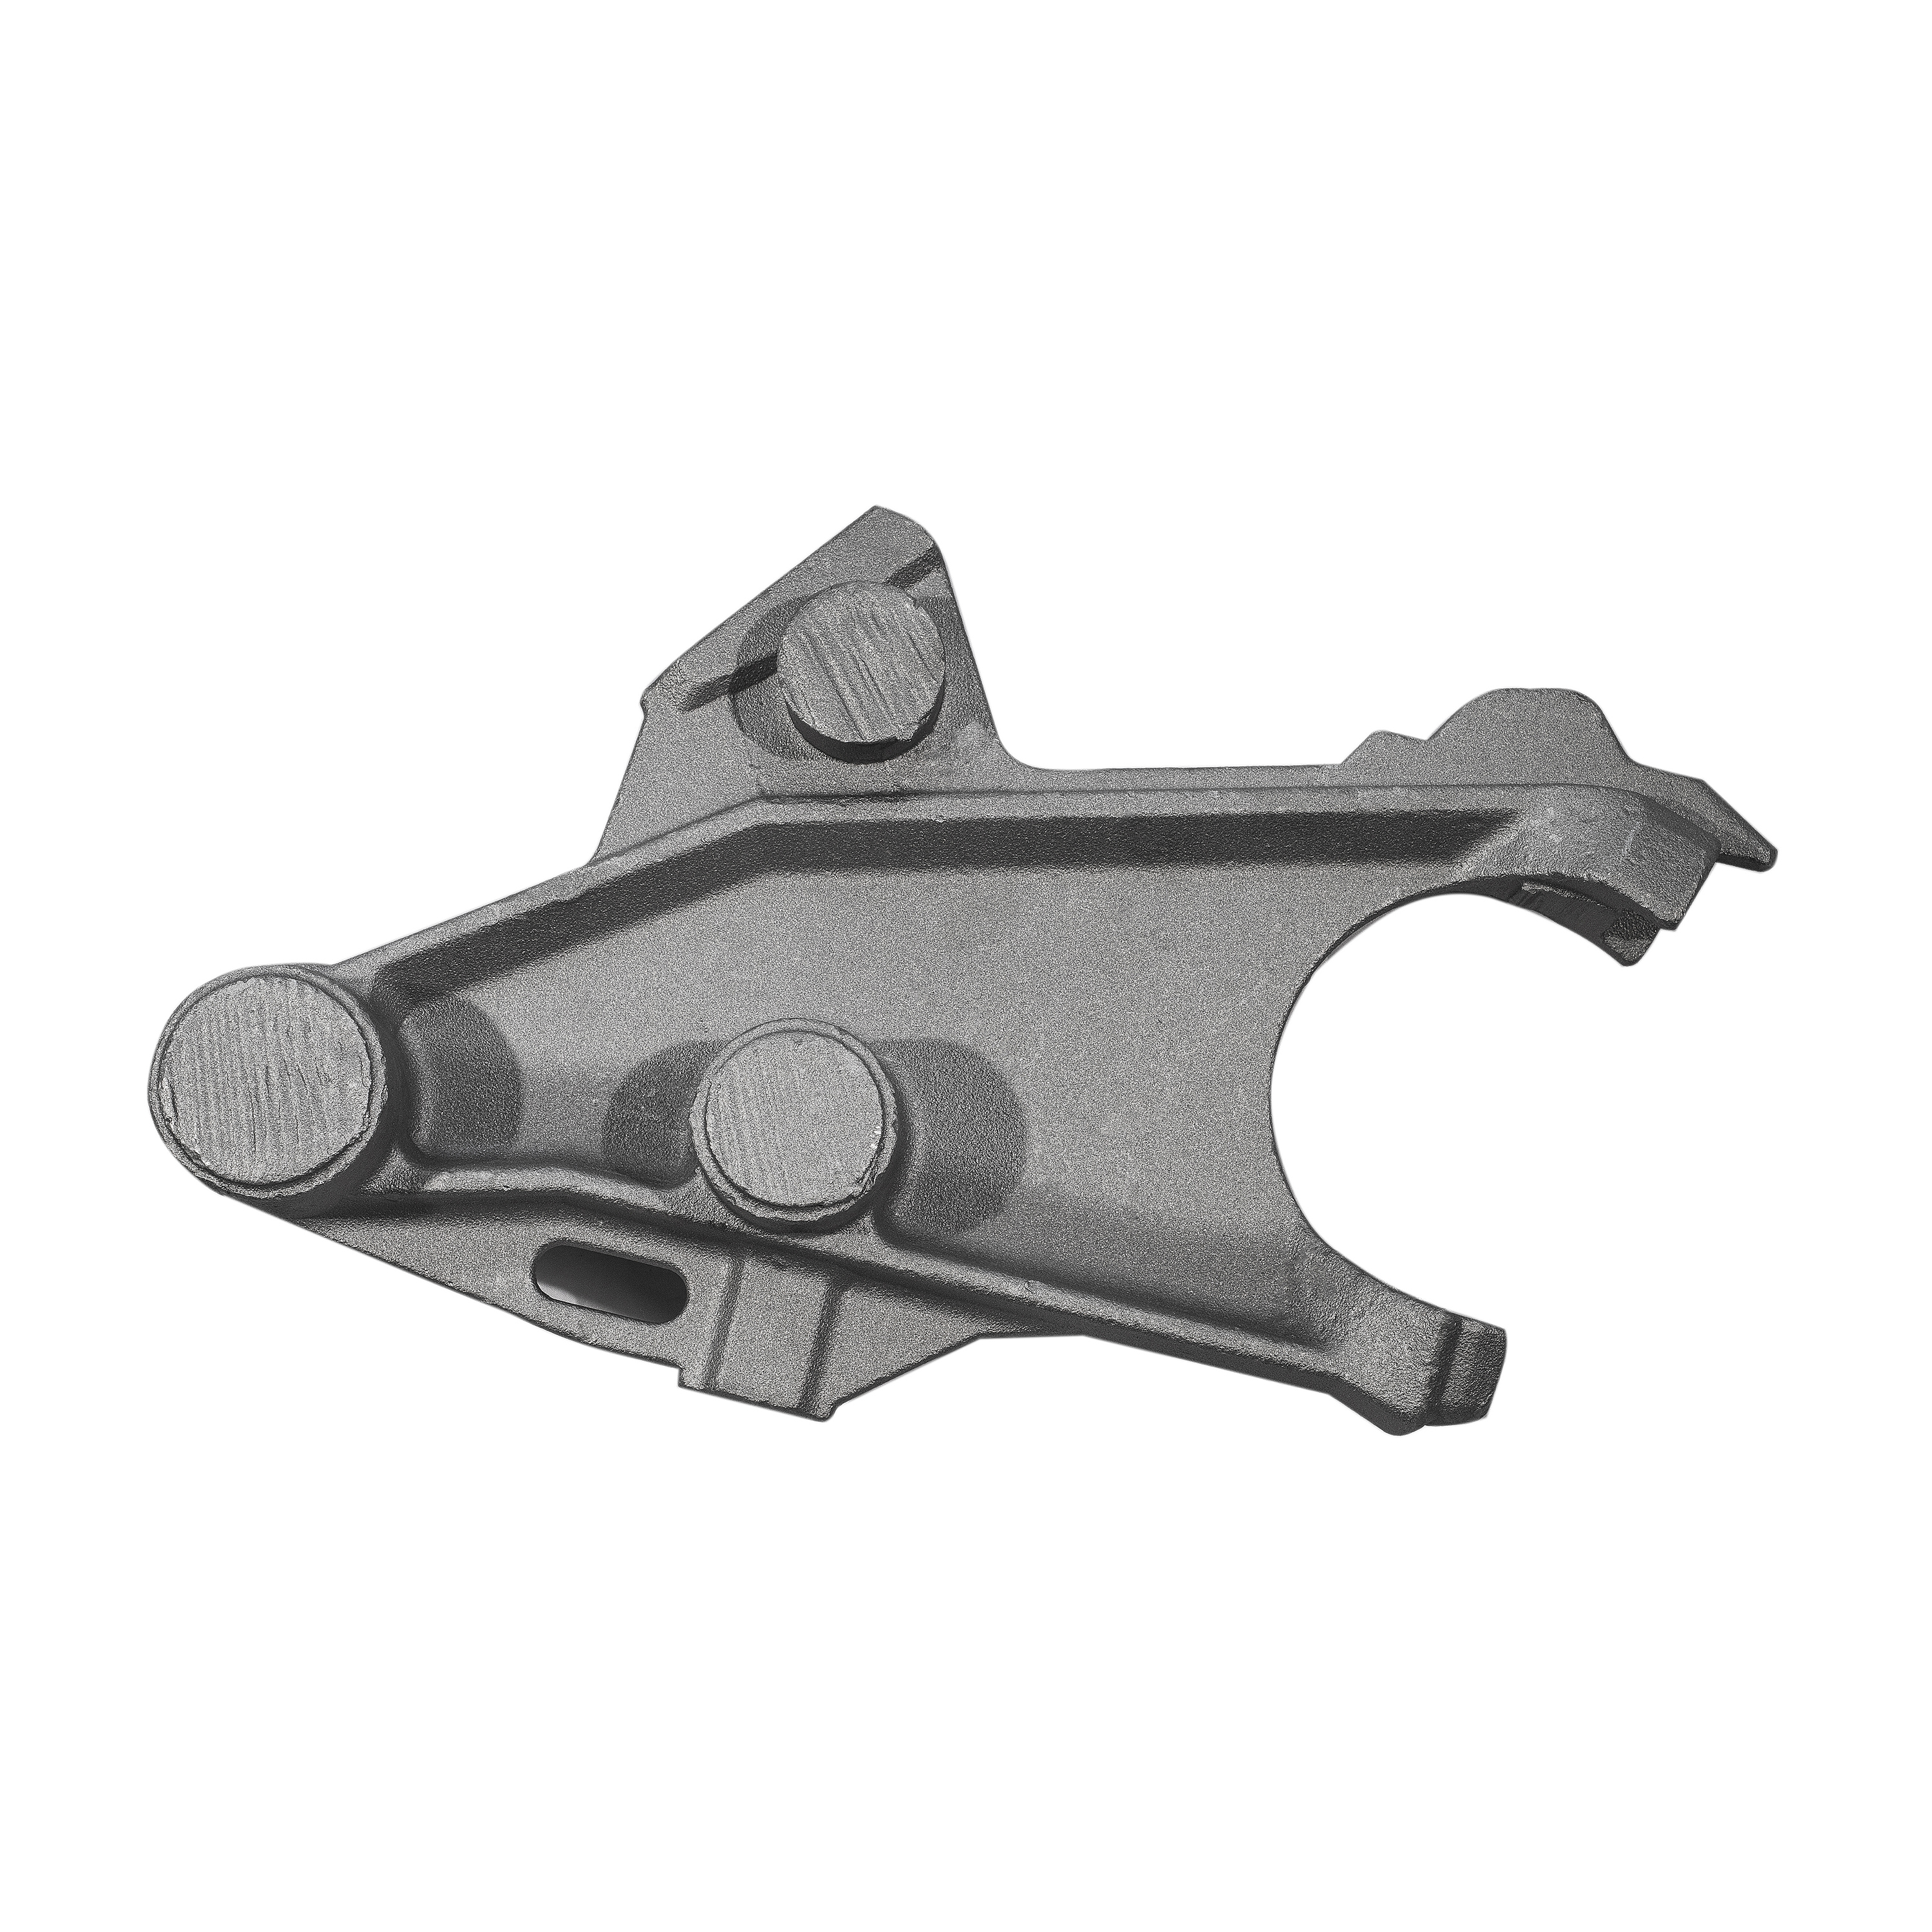 AGRICULTURE Steel Investment Casting-Front End Manufacturers, AGRICULTURE Steel Investment Casting-Front End Factory, Supply AGRICULTURE Steel Investment Casting-Front End